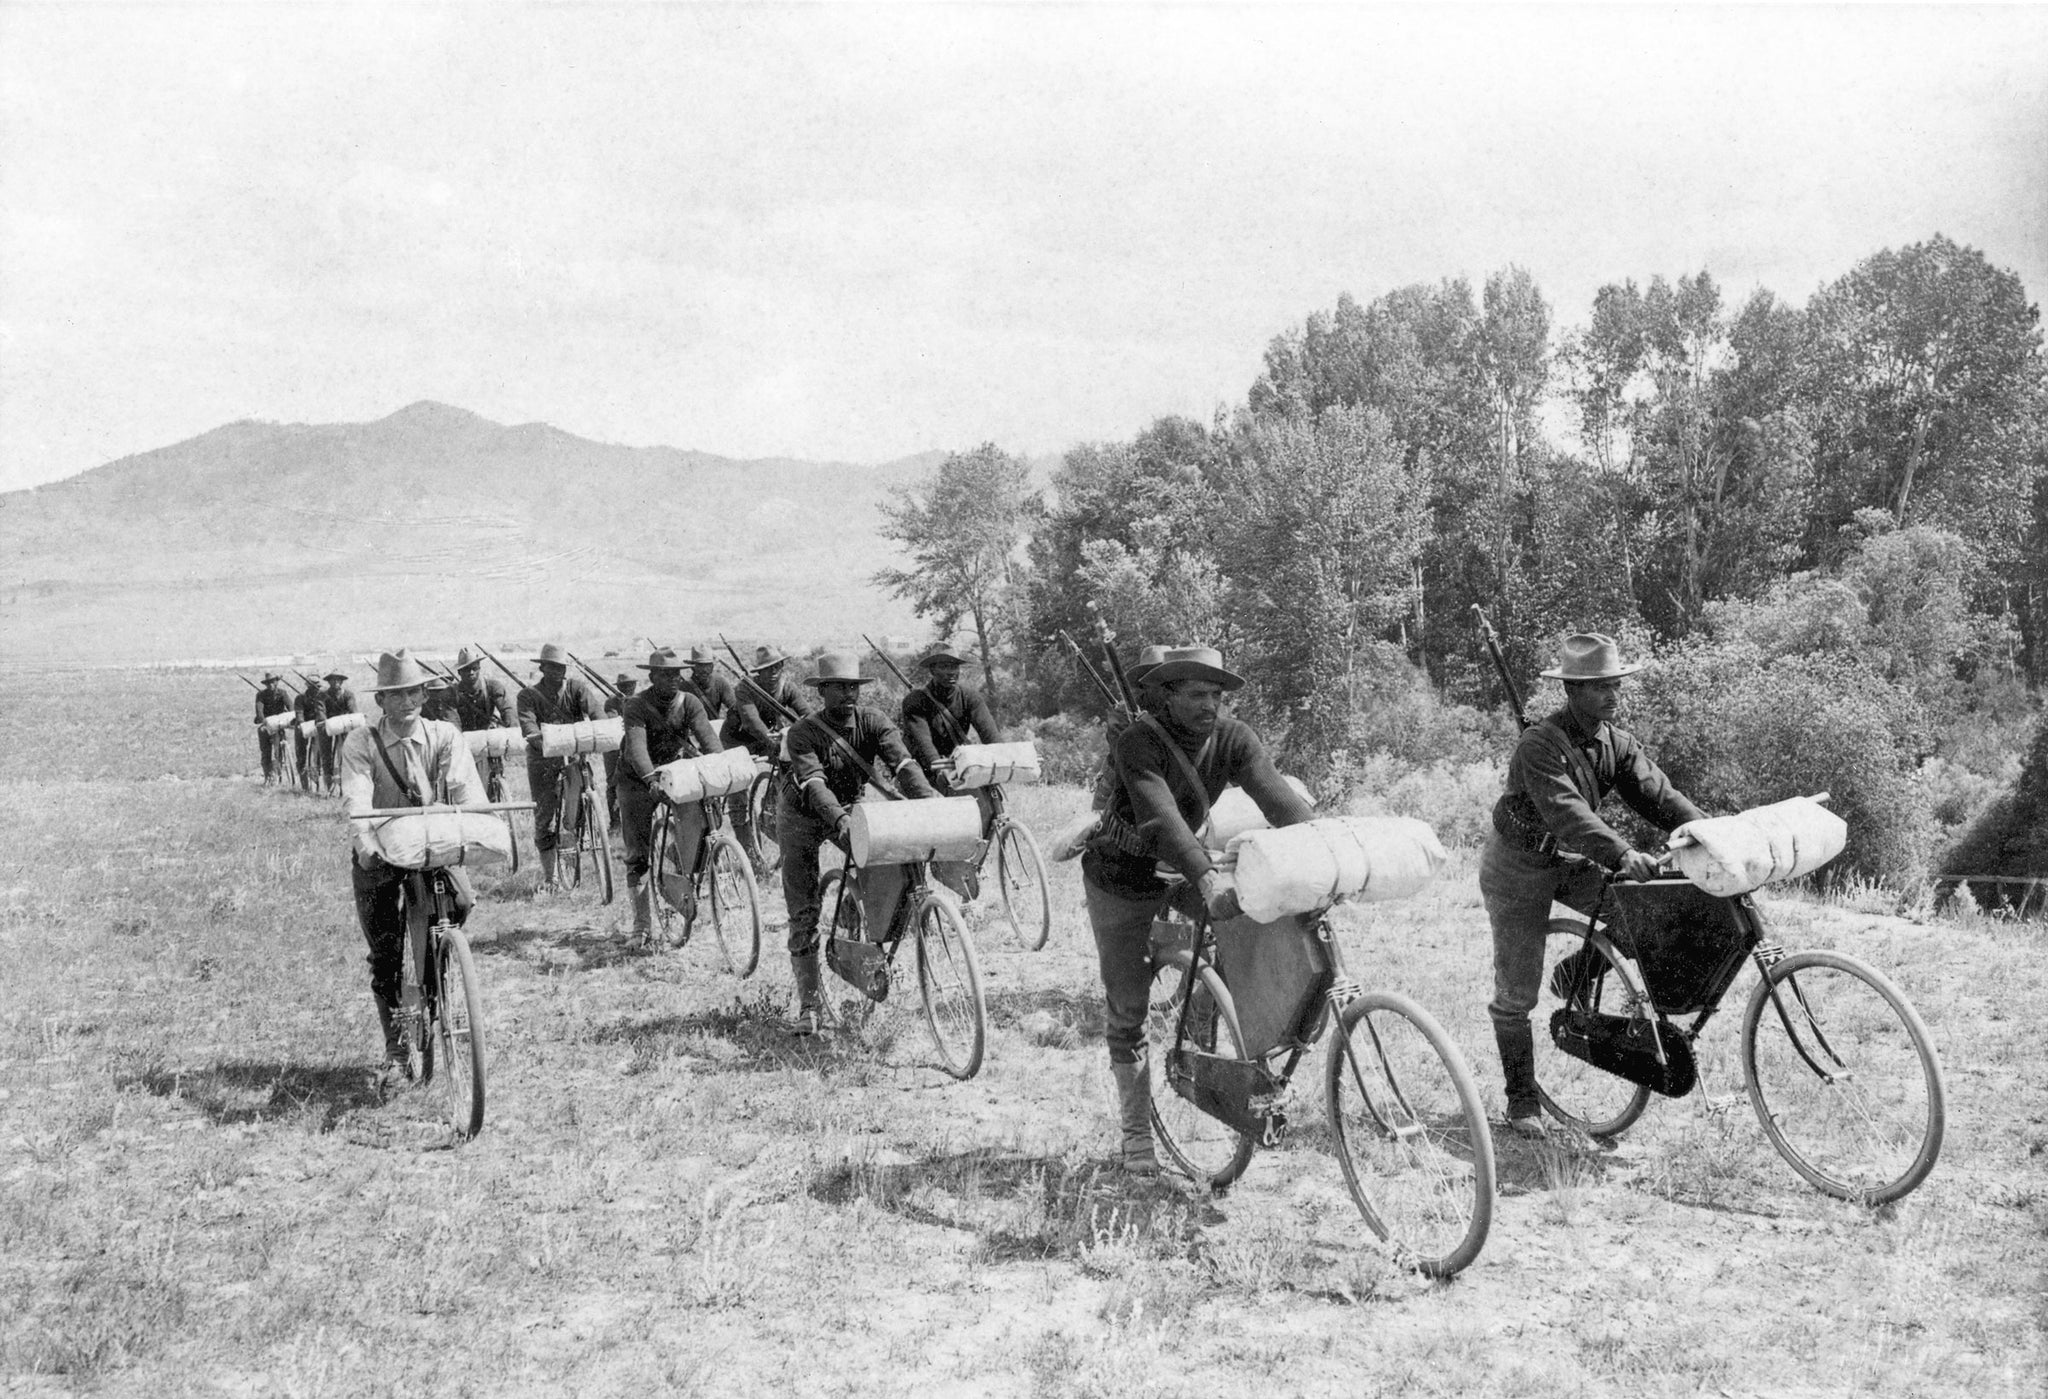 Members of the U.S. Army 25th Infantry Bicycle Corps stationed at Fort Missoula, 1897. Lt. James A. Moss is riding on the left beside the two rows of soldiers. -- Image 73-0031, Courtesy Mansfield Library Archives, University of Montana